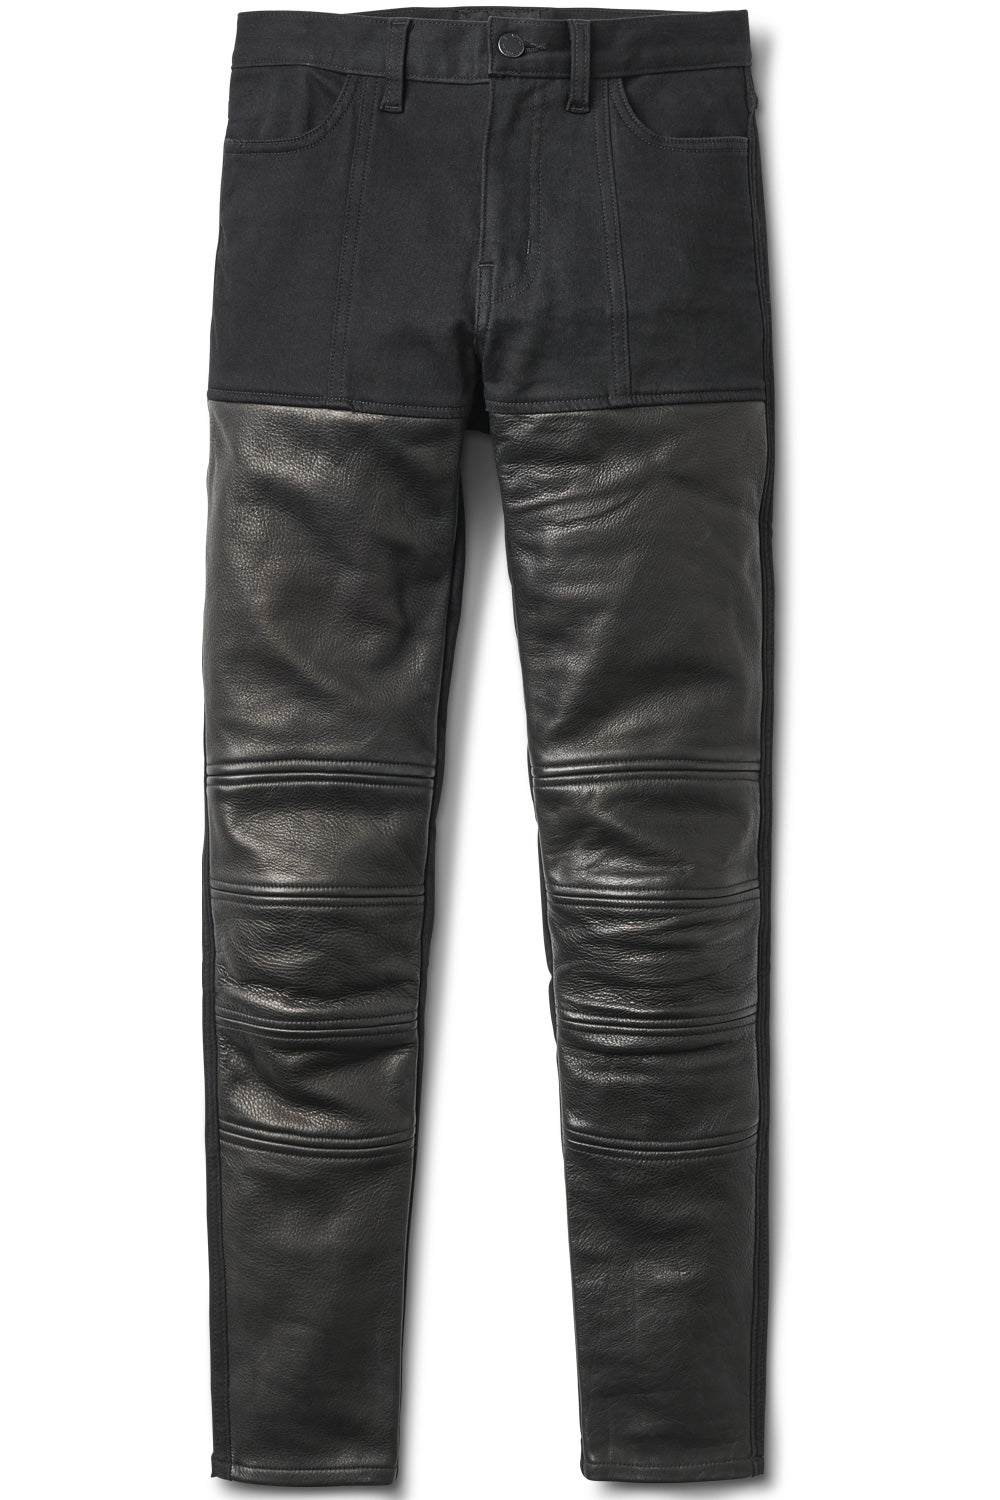 Ladies Side Lace Cow Hide Leather Trousers 302 – OSX BikerFashion